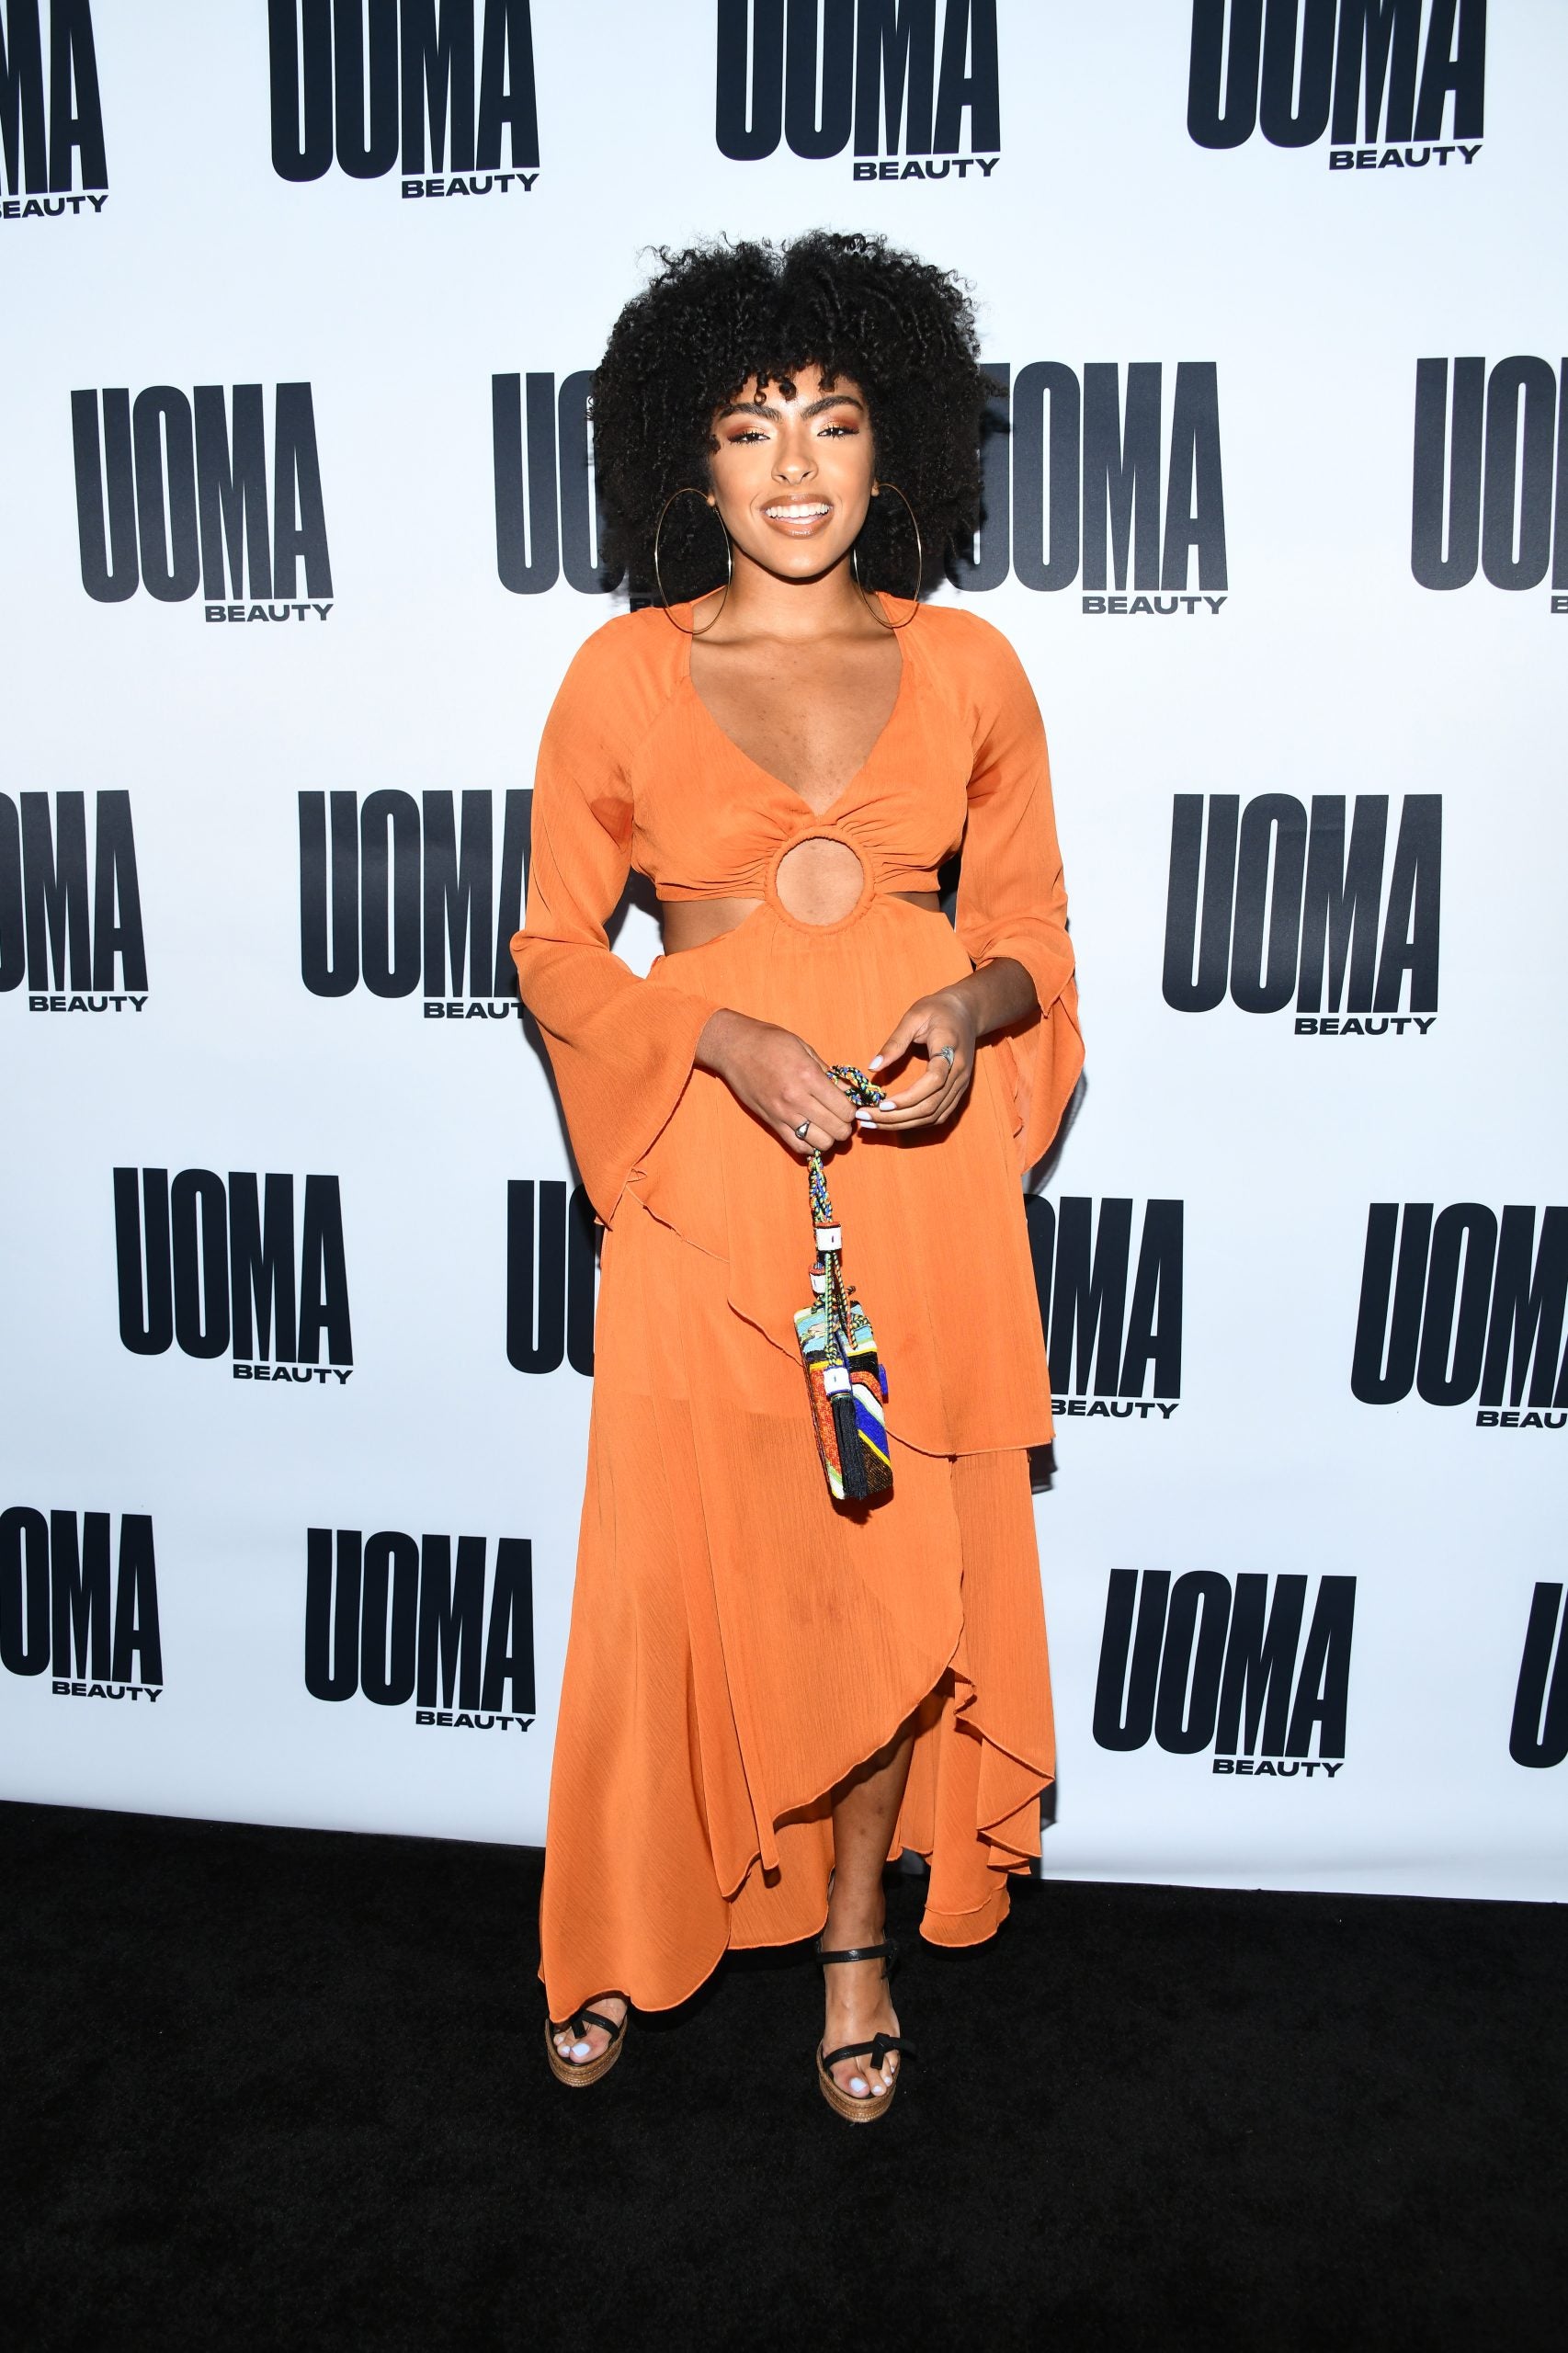 How Ivy Coco Made The Original Dream Girl One Of The Best Dressed This Awards Season